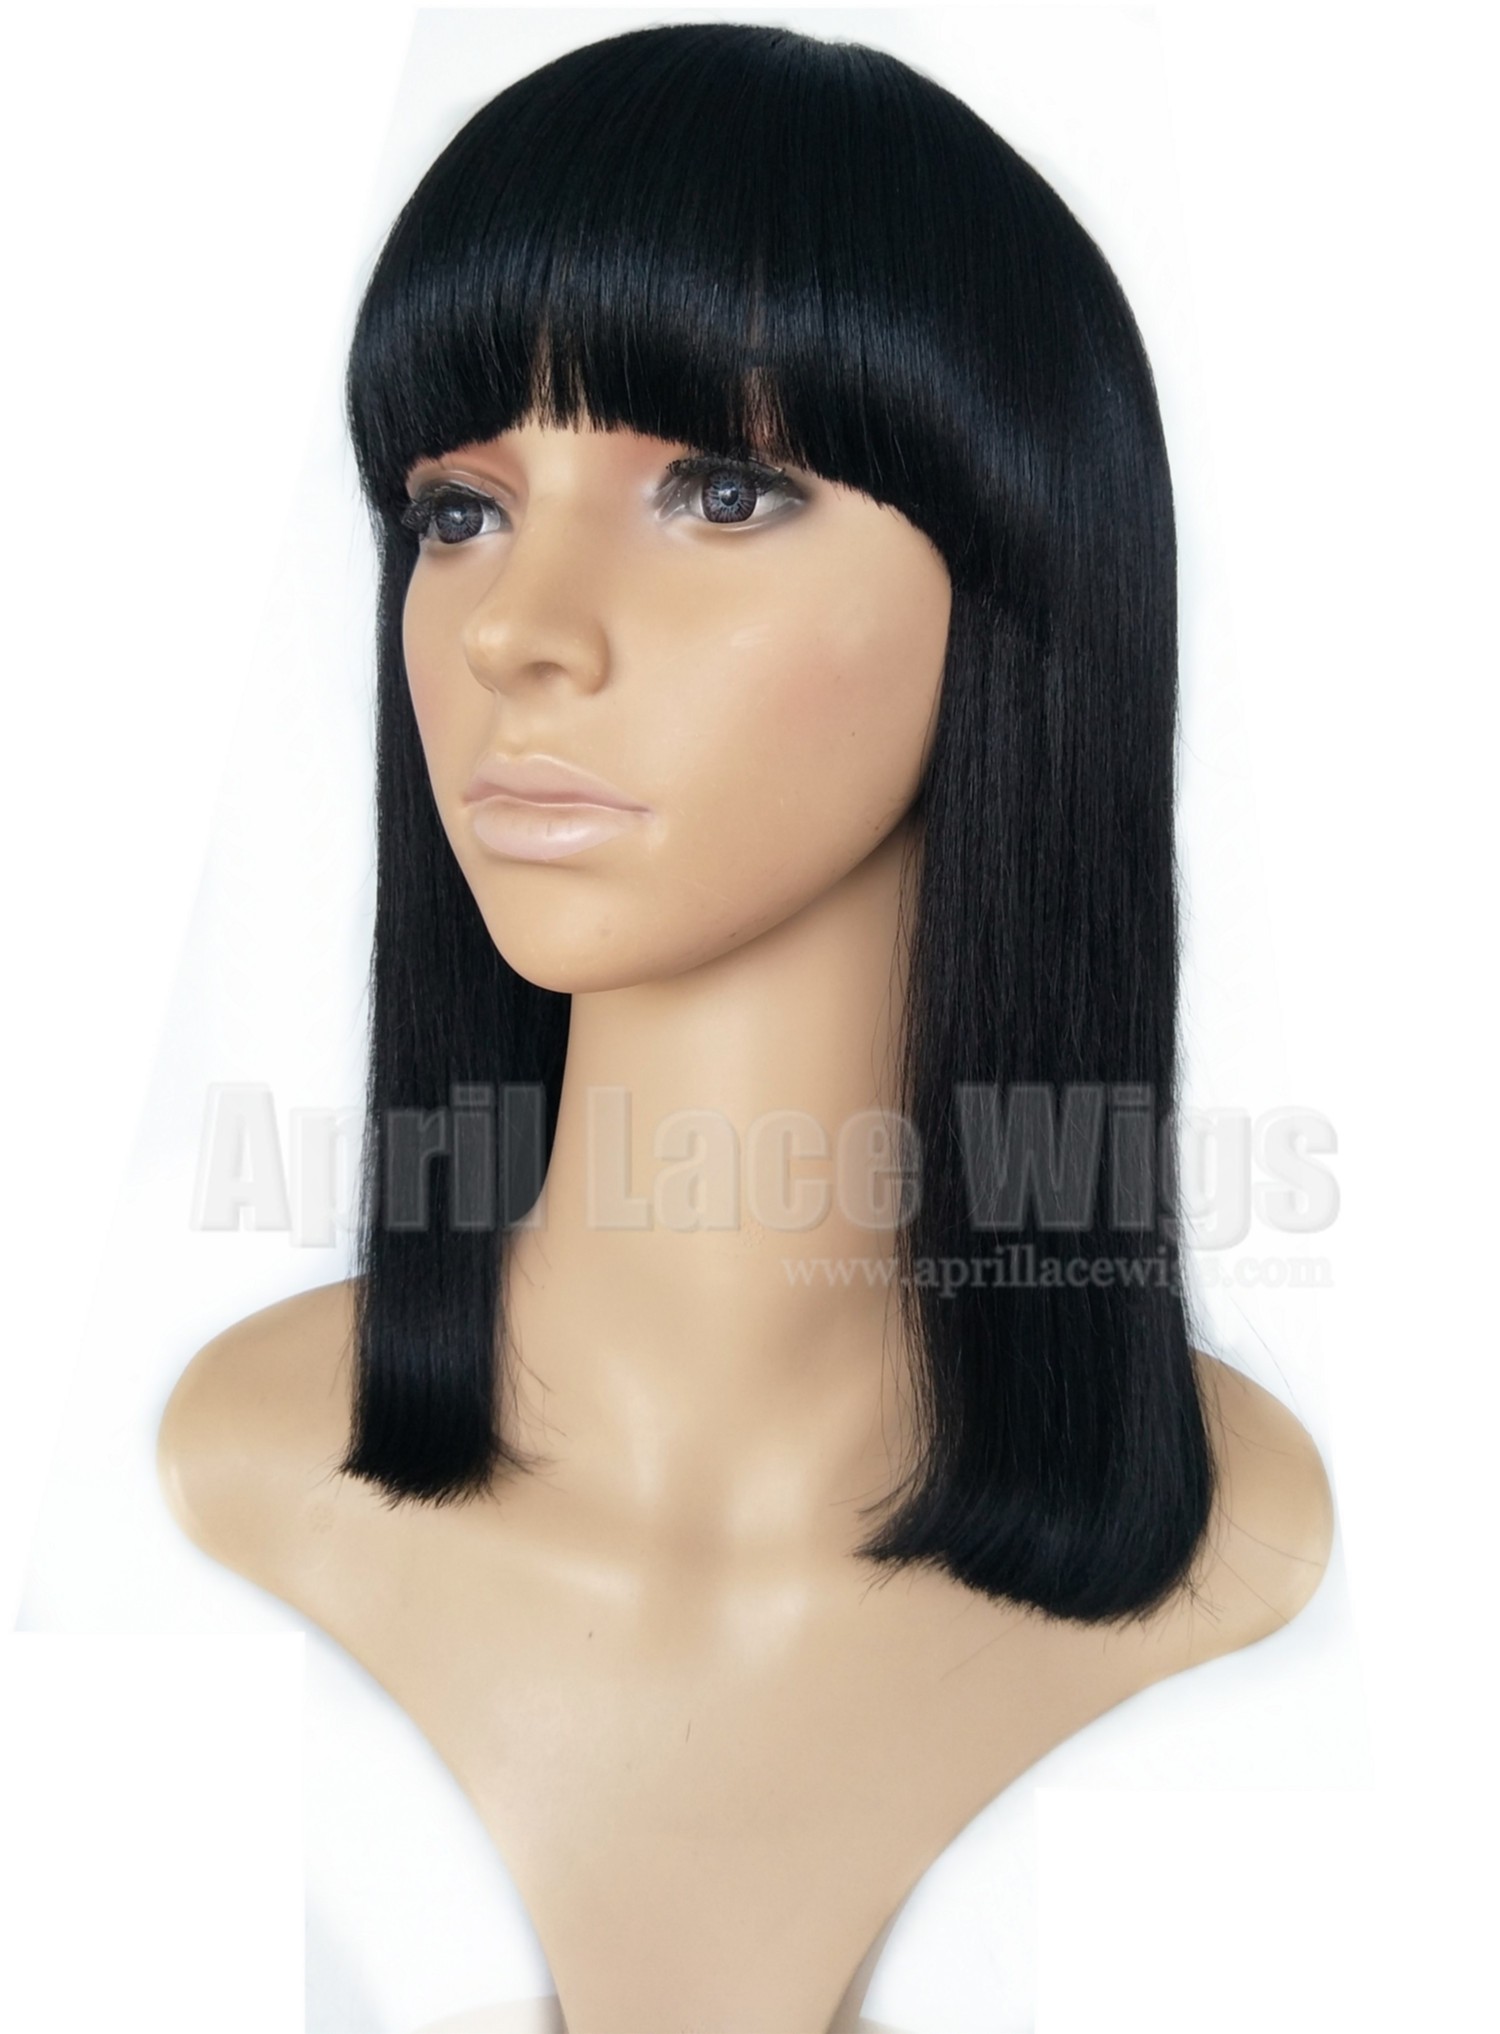 Remy hair blunt cut bob no lace machine made wig with a bang